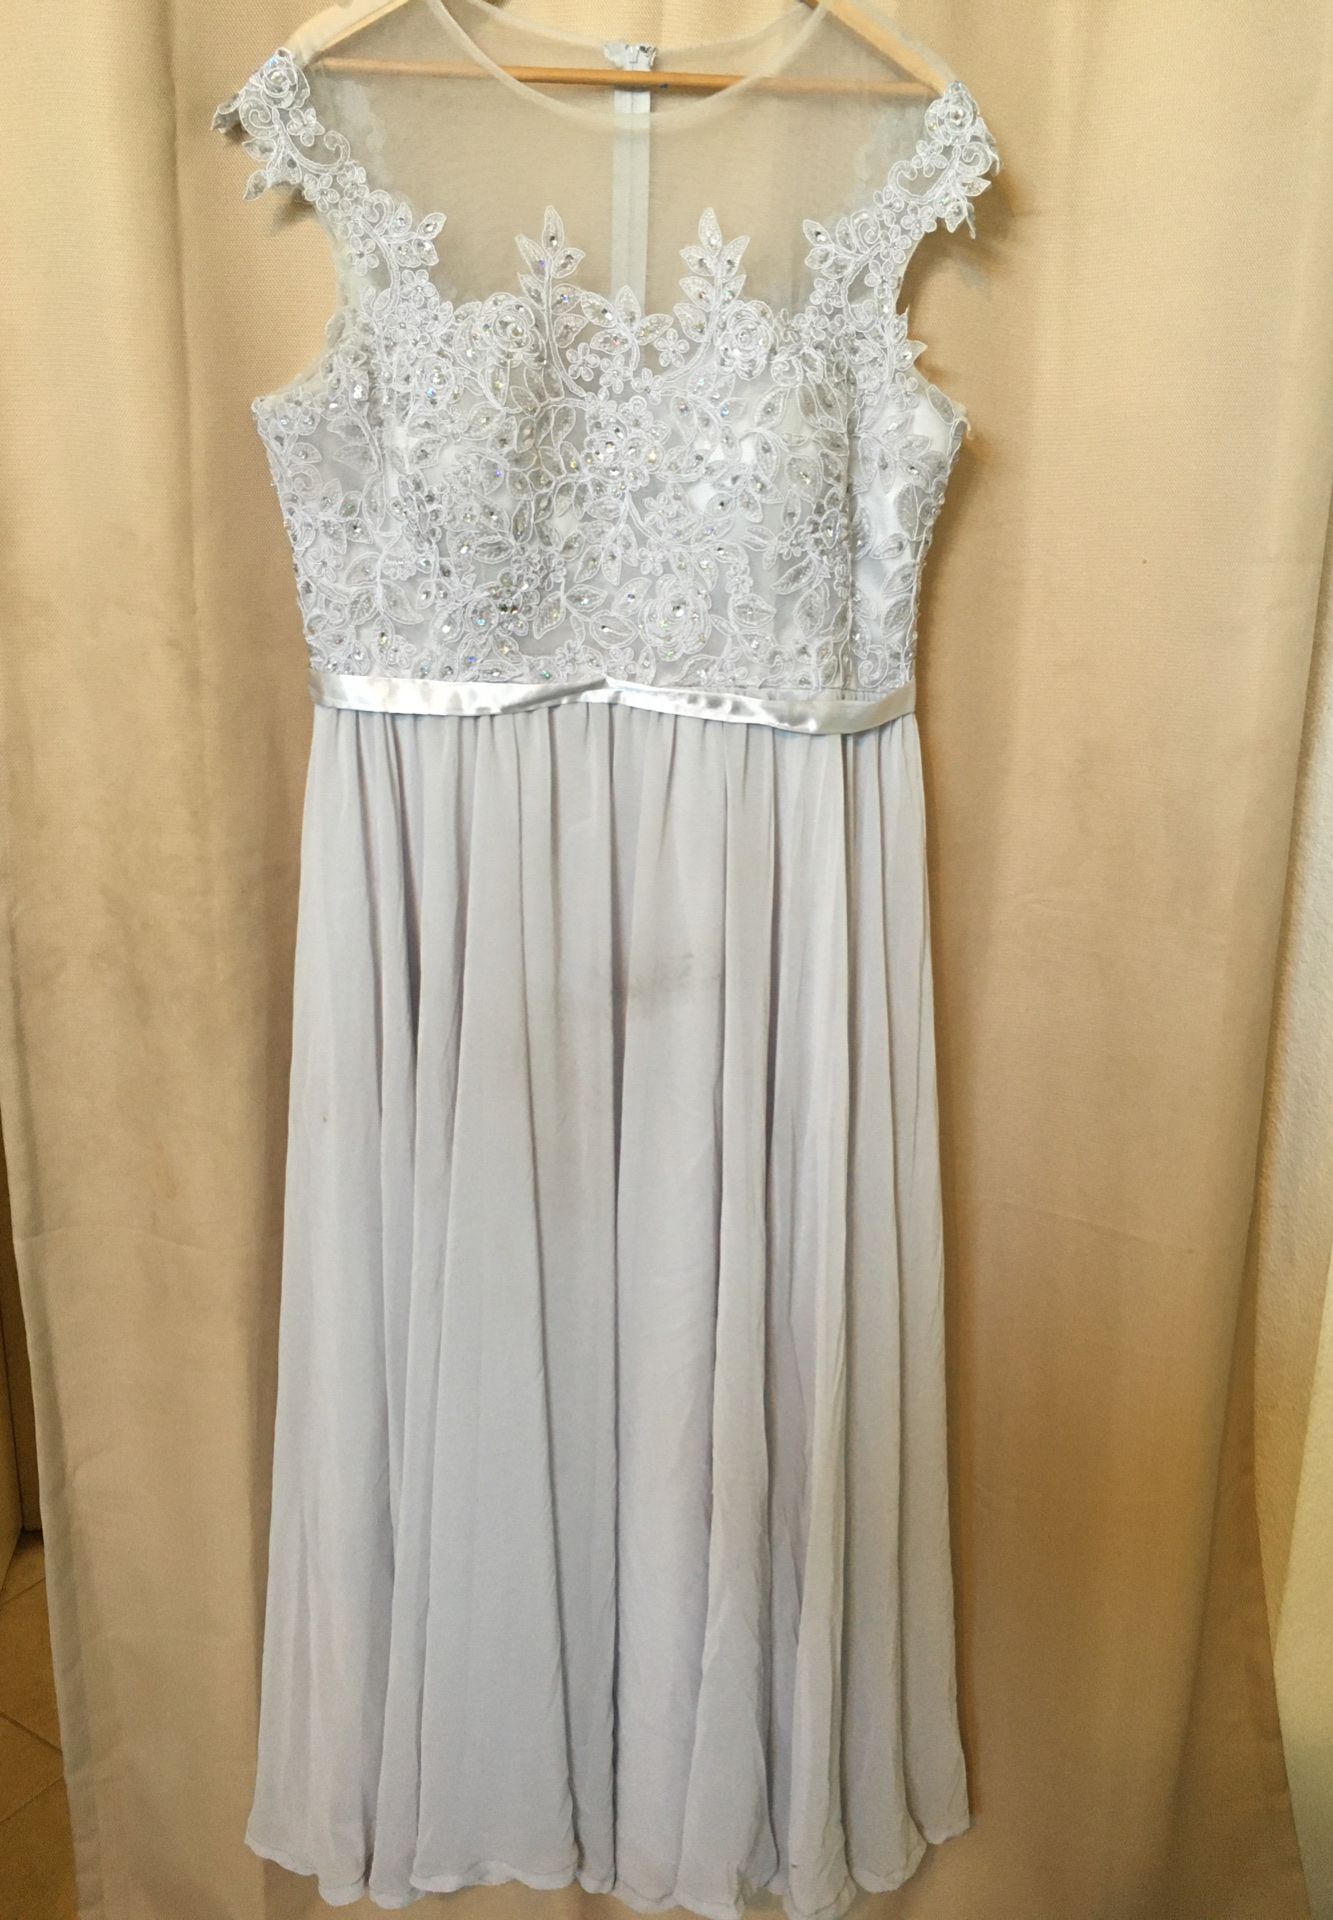 Bridesmaid Dress Satin Grey/Silver with Sheer and Sequin decal.